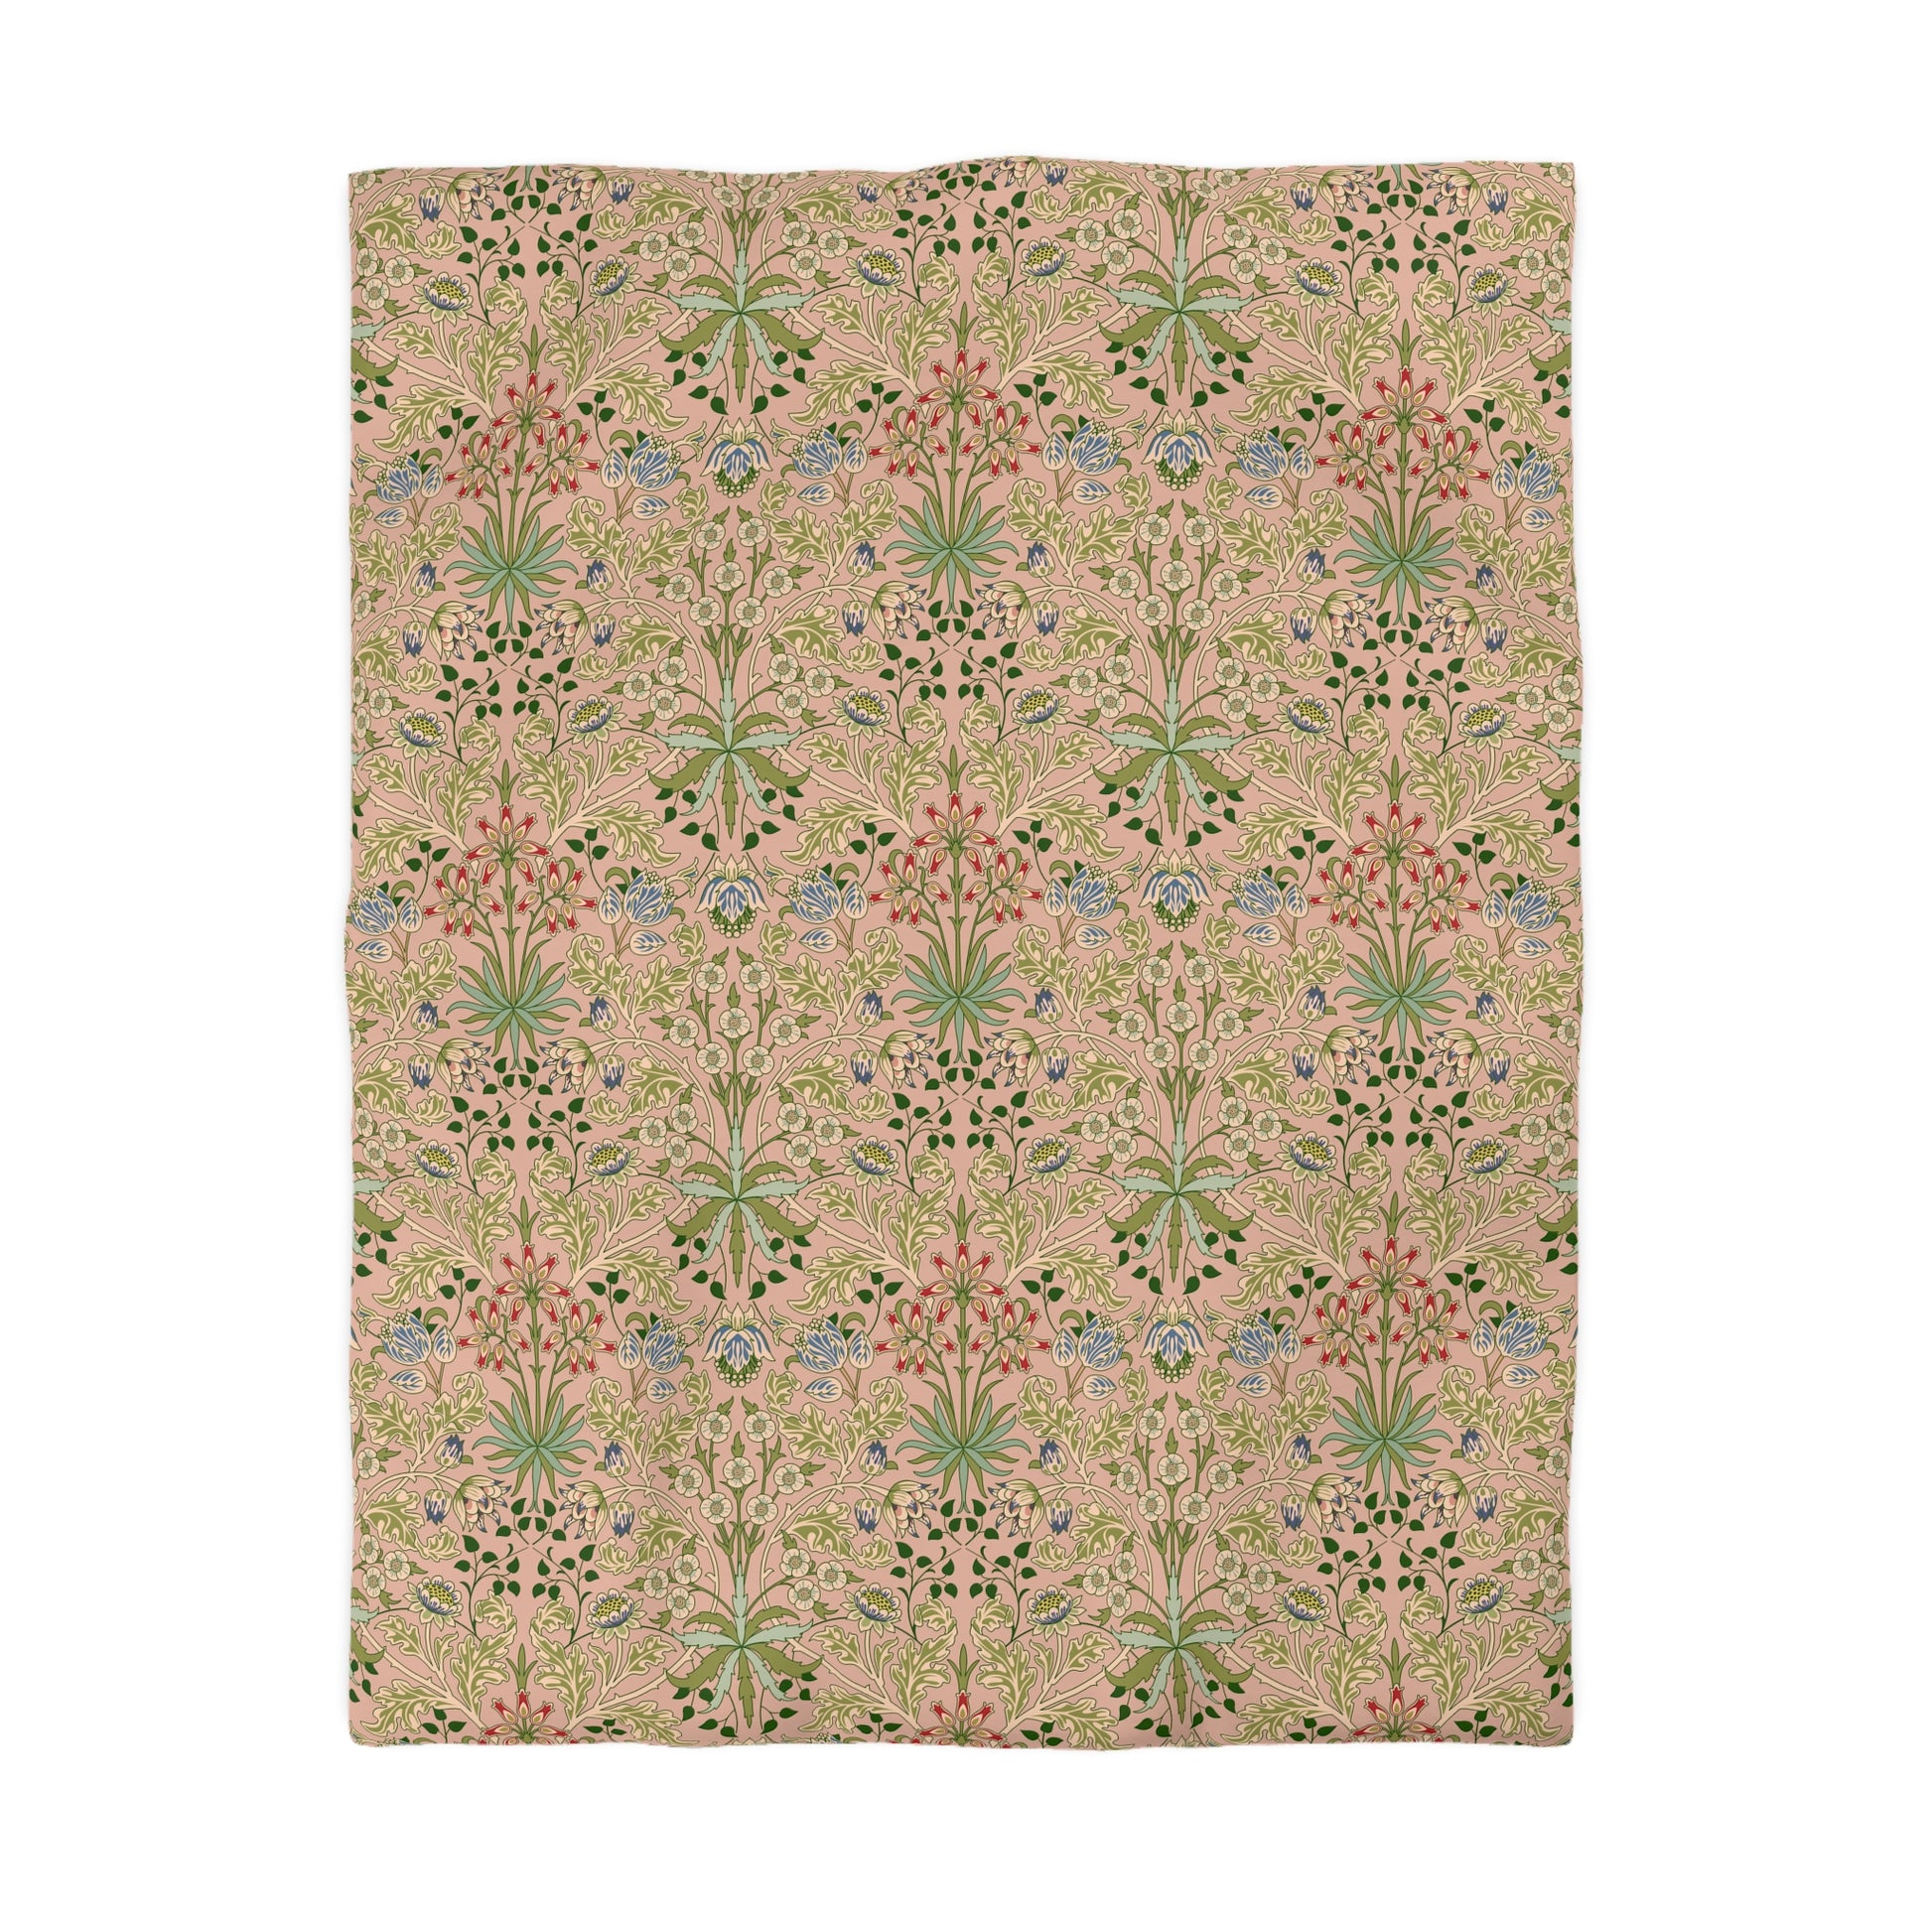 william-morris-co-duvet-cover-hyacinth-collection-blossom-14